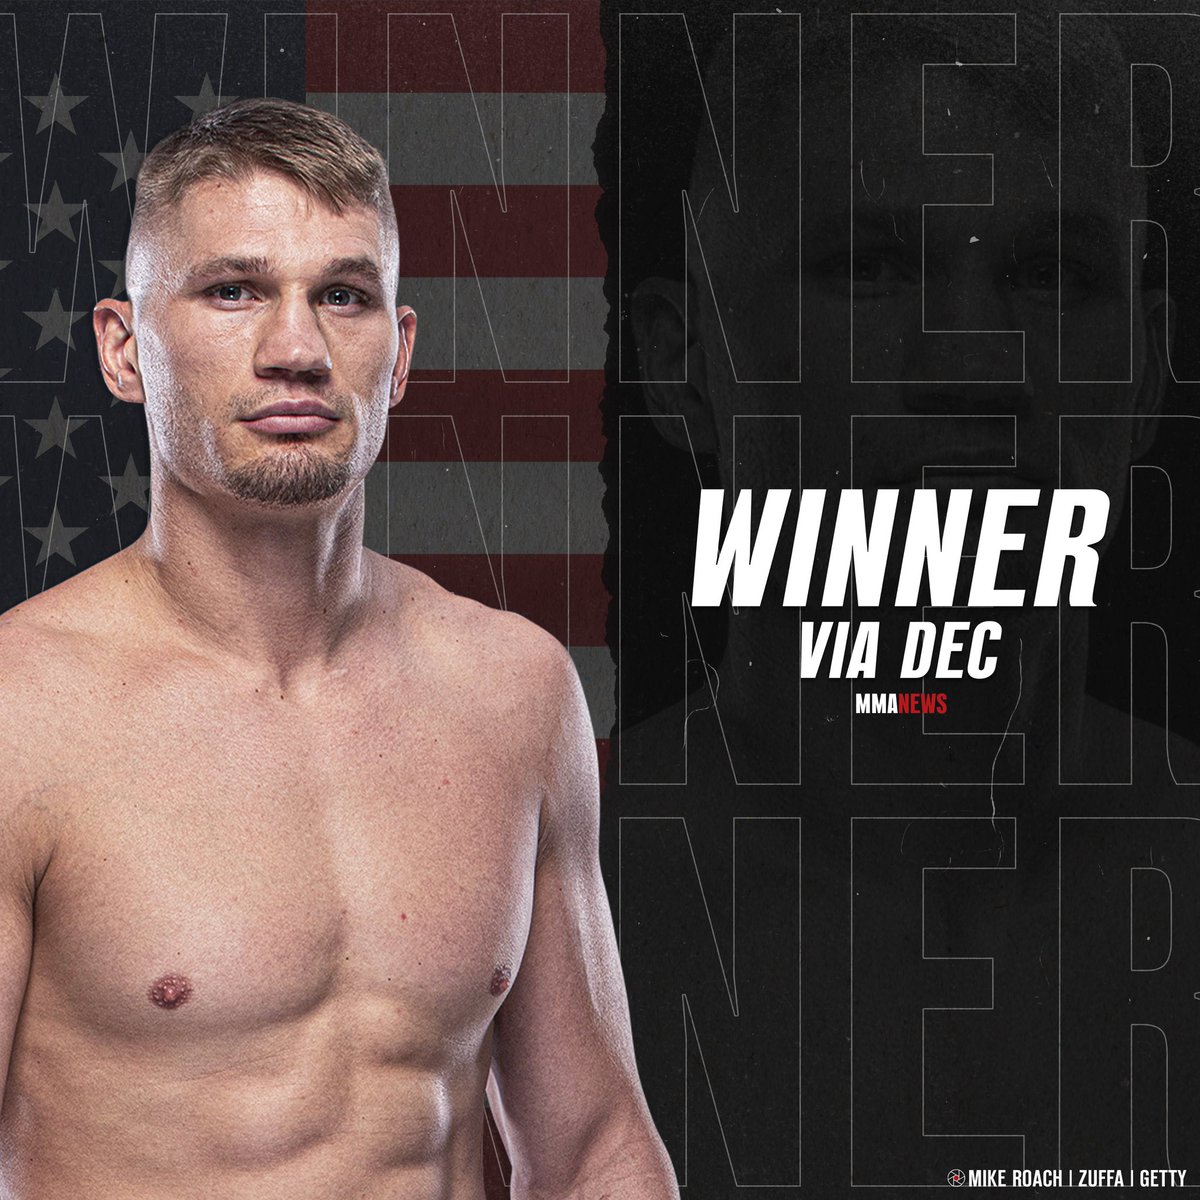 [WARNING: POTENTIAL SPOILERS AHEAD!]

Austin Hubbard wins via S DEC against Roosevelt Roberts

What were your thoughts on the fight?

#MMA #UFC #TUF31 #FIGHT #AUSTINHUBBARD #ROOSEVELTROBERTS